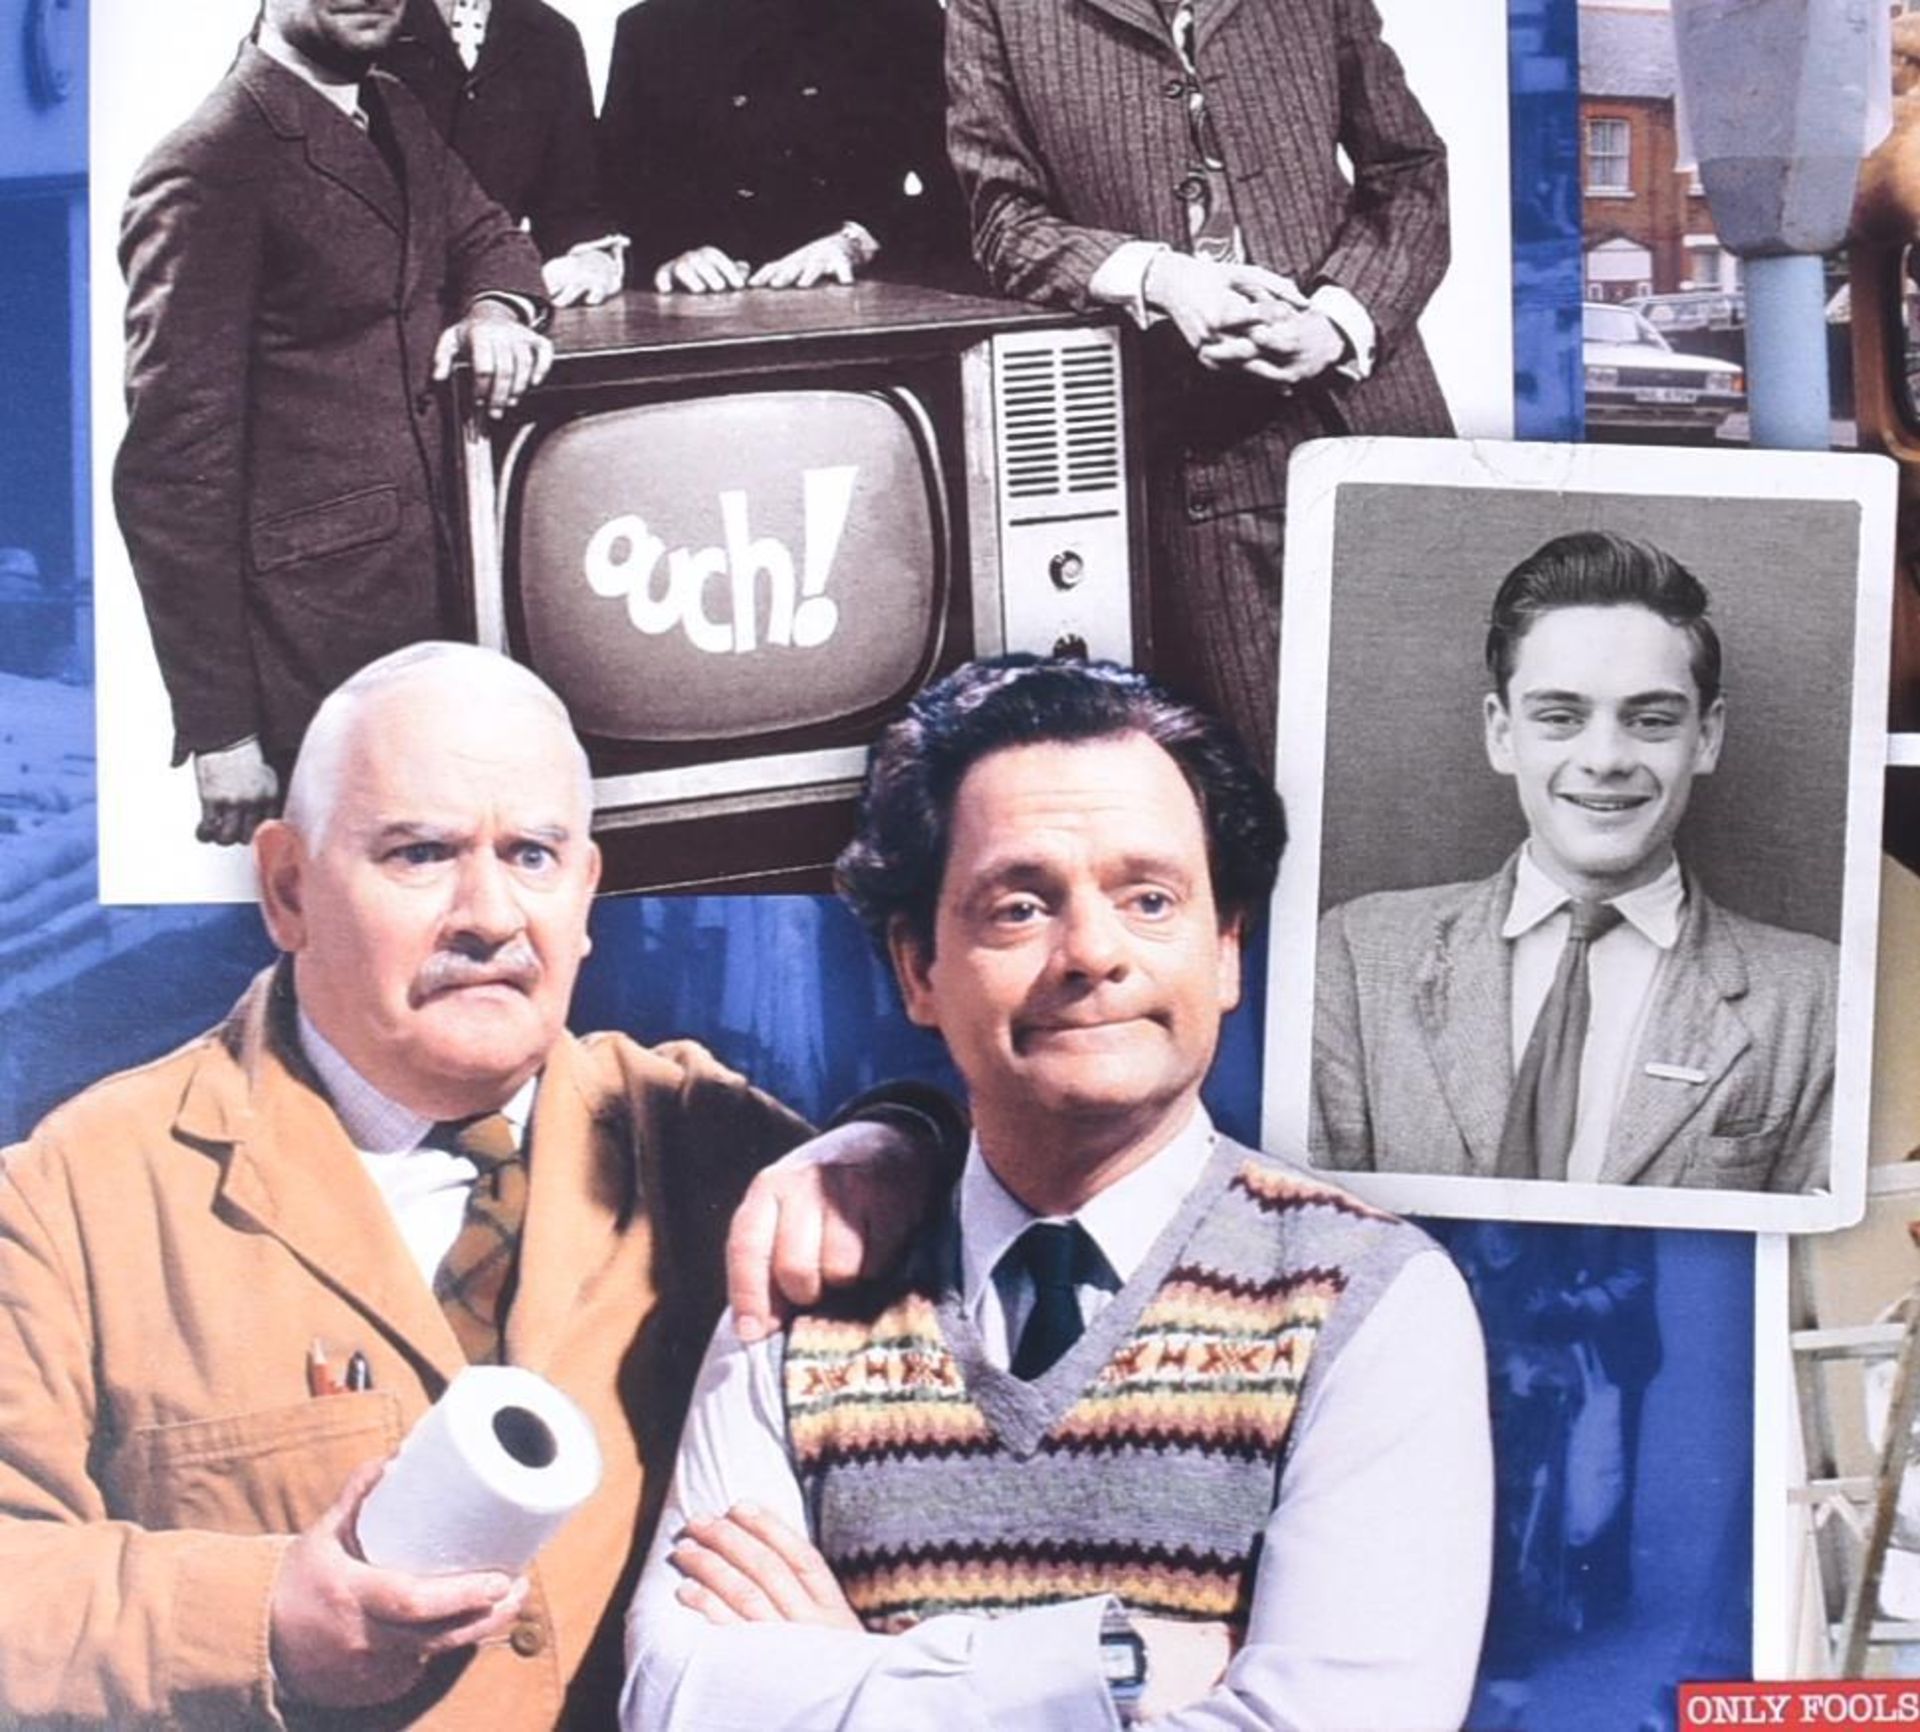 ONLY FOOLS & HORSES - SIR DAVID JASON EXHIBITION SIGNED PROGRAMME - Image 5 of 5